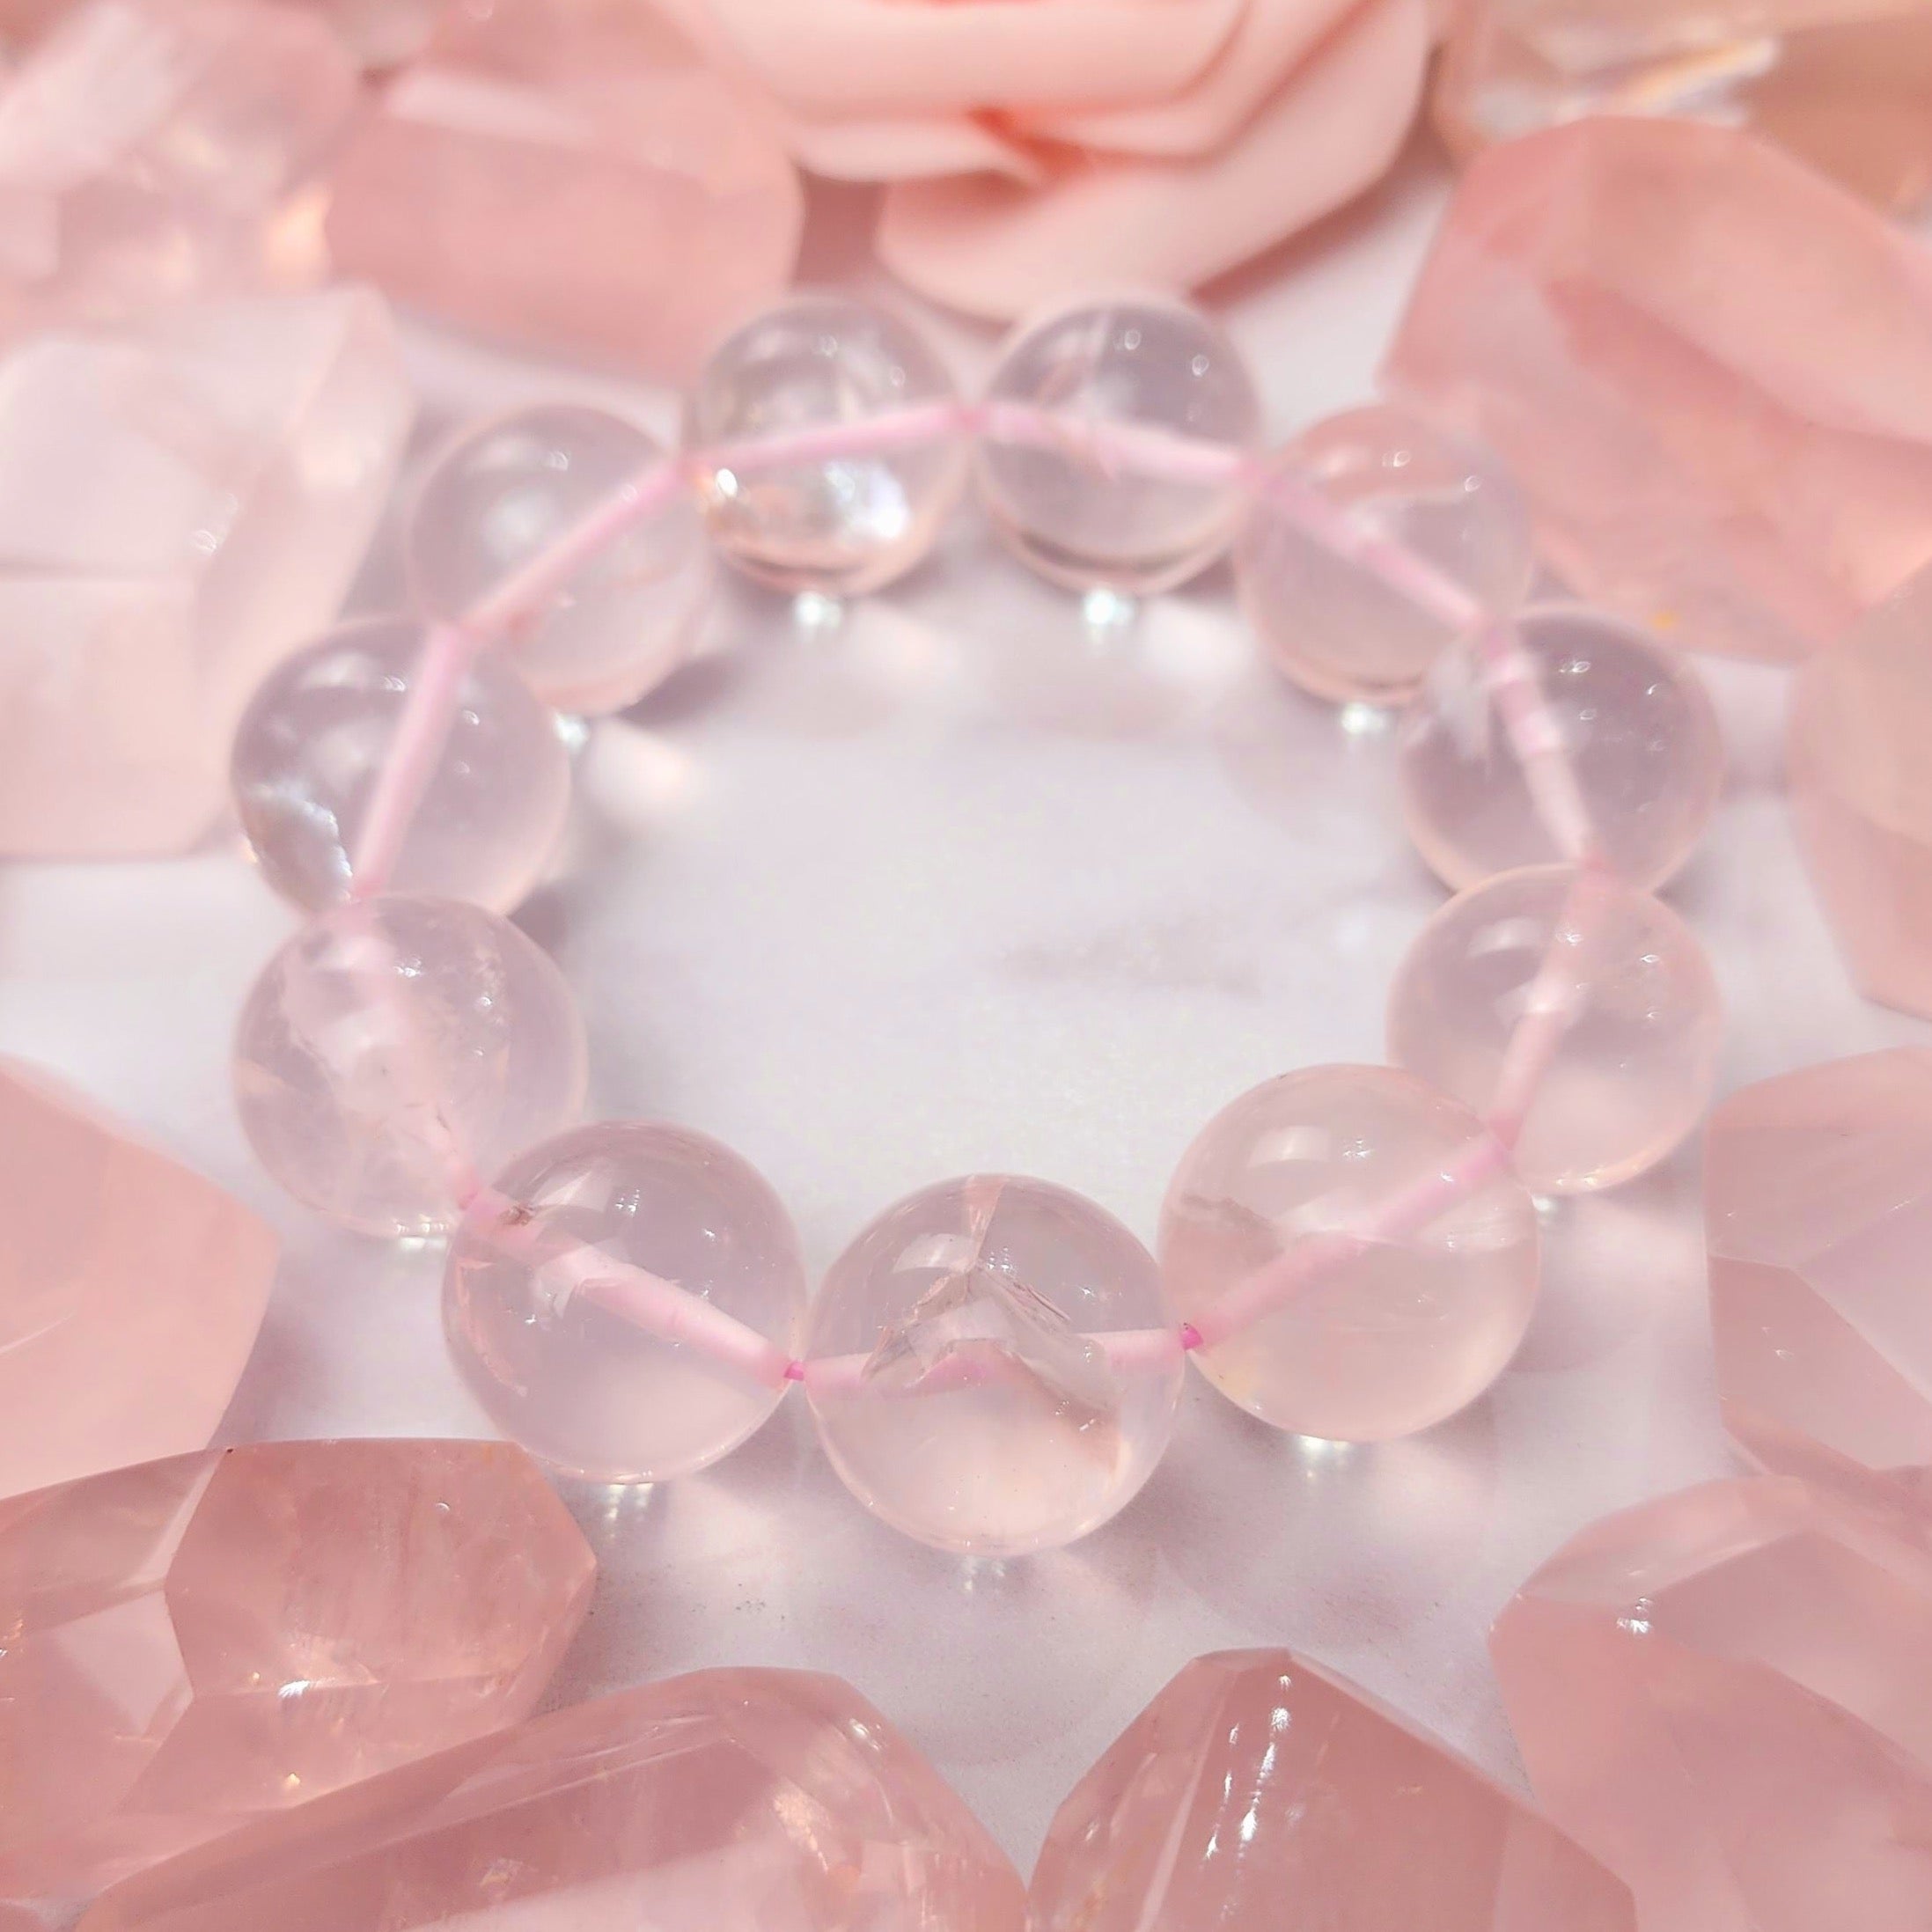 Mozambique Star Rose Quartz Bracelet with Rainbows for Self Love And Healthy Aura Healing